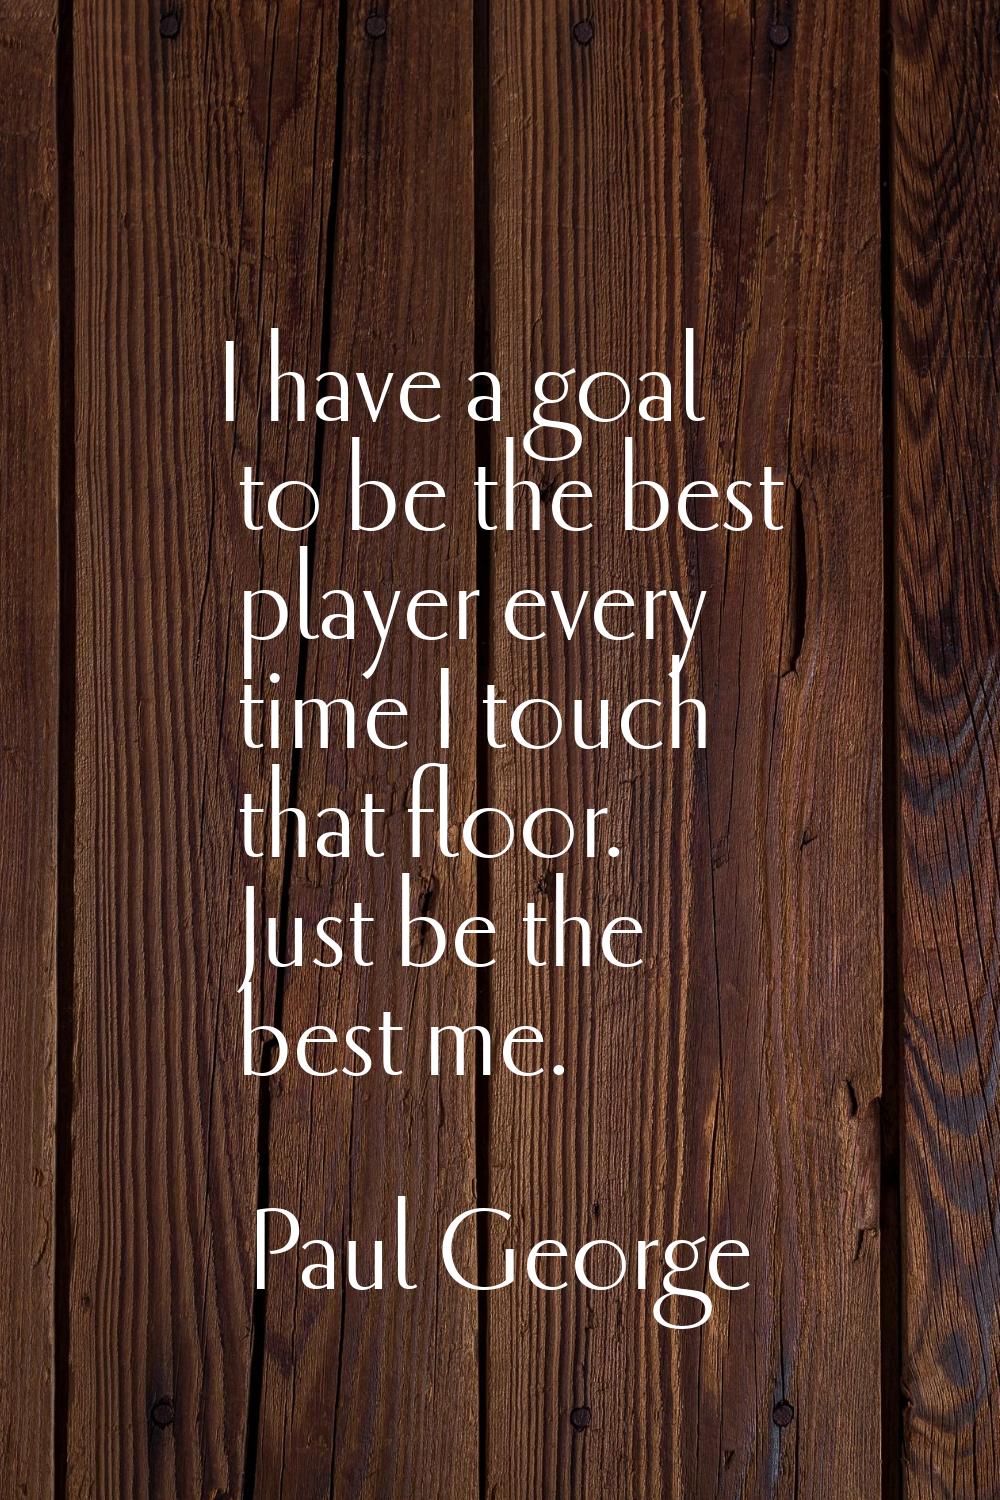 I have a goal to be the best player every time I touch that floor. Just be the best me.